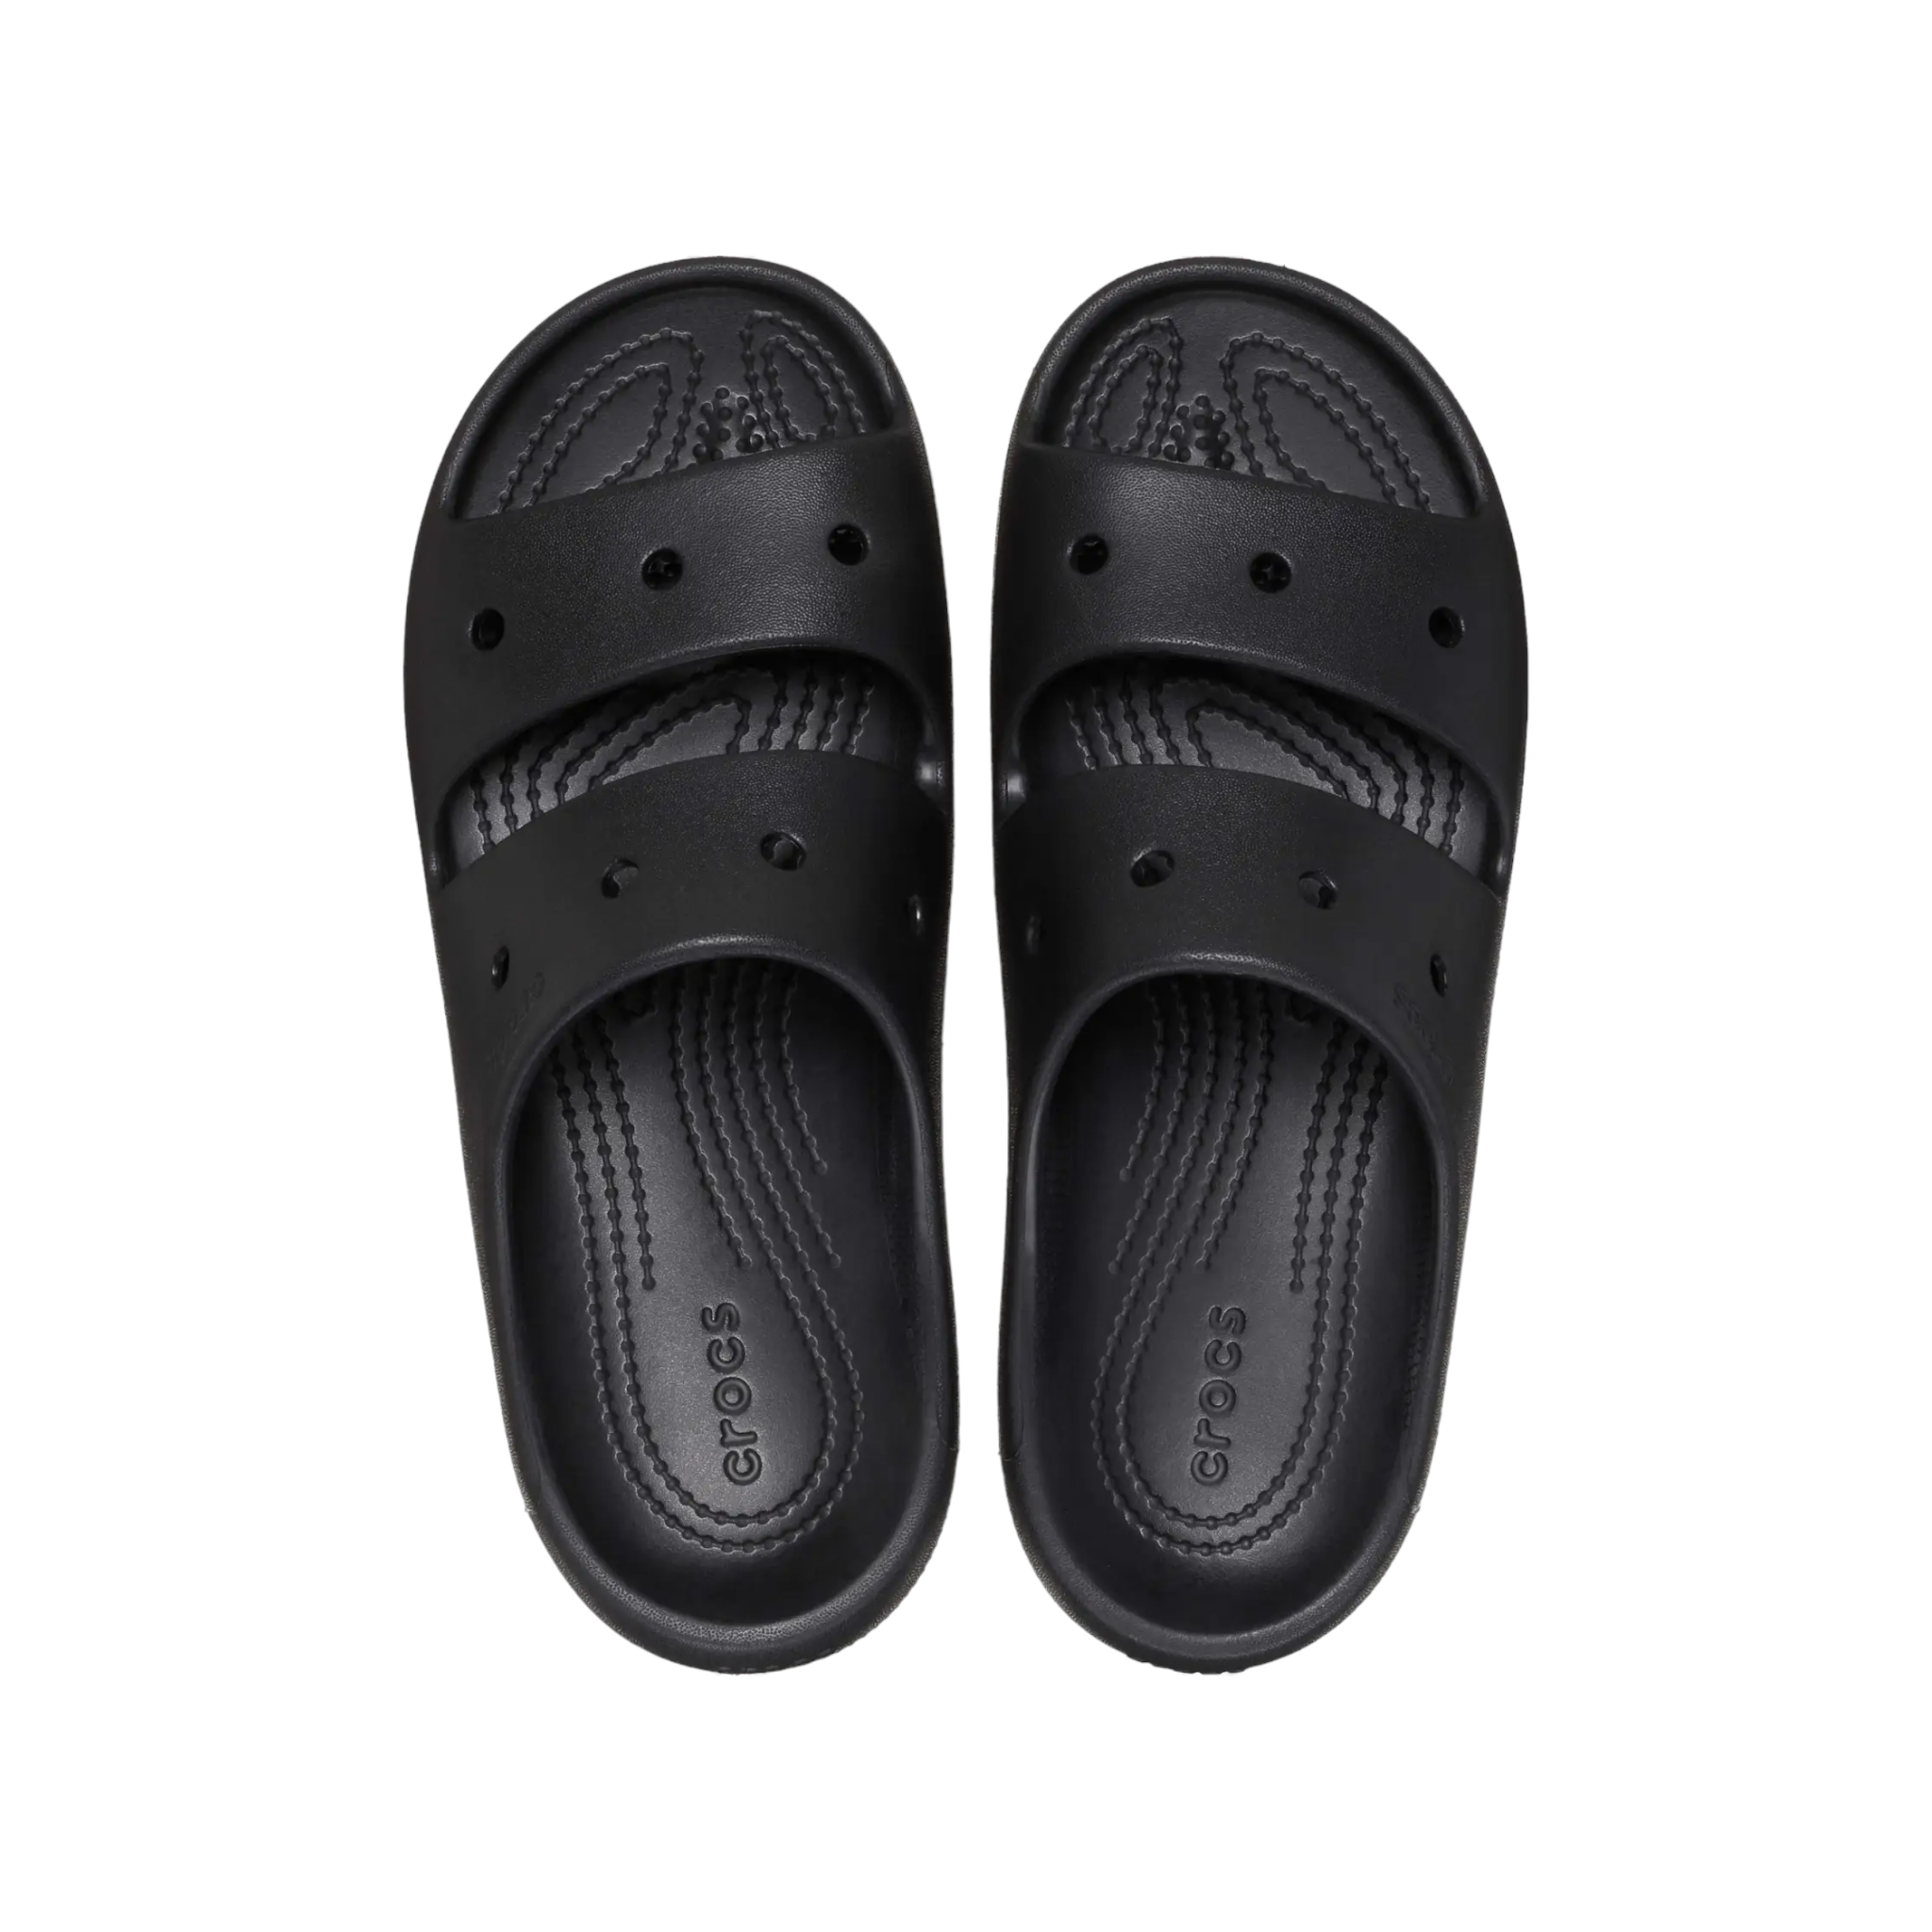 Shop Classic Sandal V2 - with shoe&amp;me - from Crocs - Sandals - Mens, Sandals, Summer, Womens - [collection]